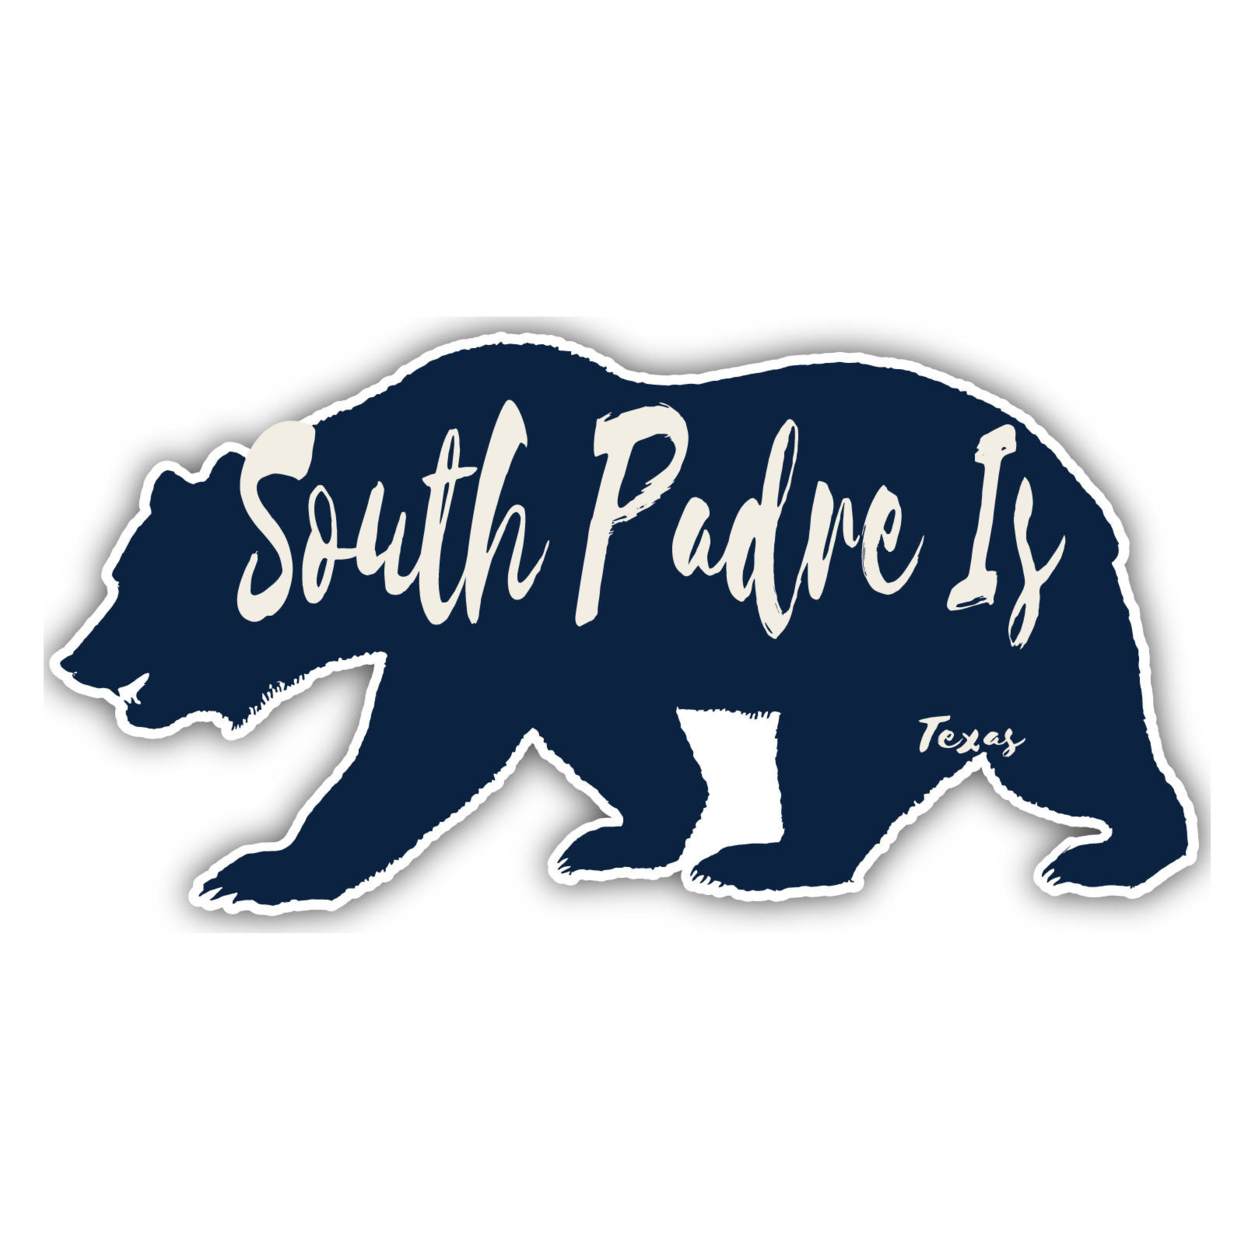 South Padre Is Texas Souvenir Decorative Stickers (Choose Theme And Size) - Single Unit, 4-Inch, Bear